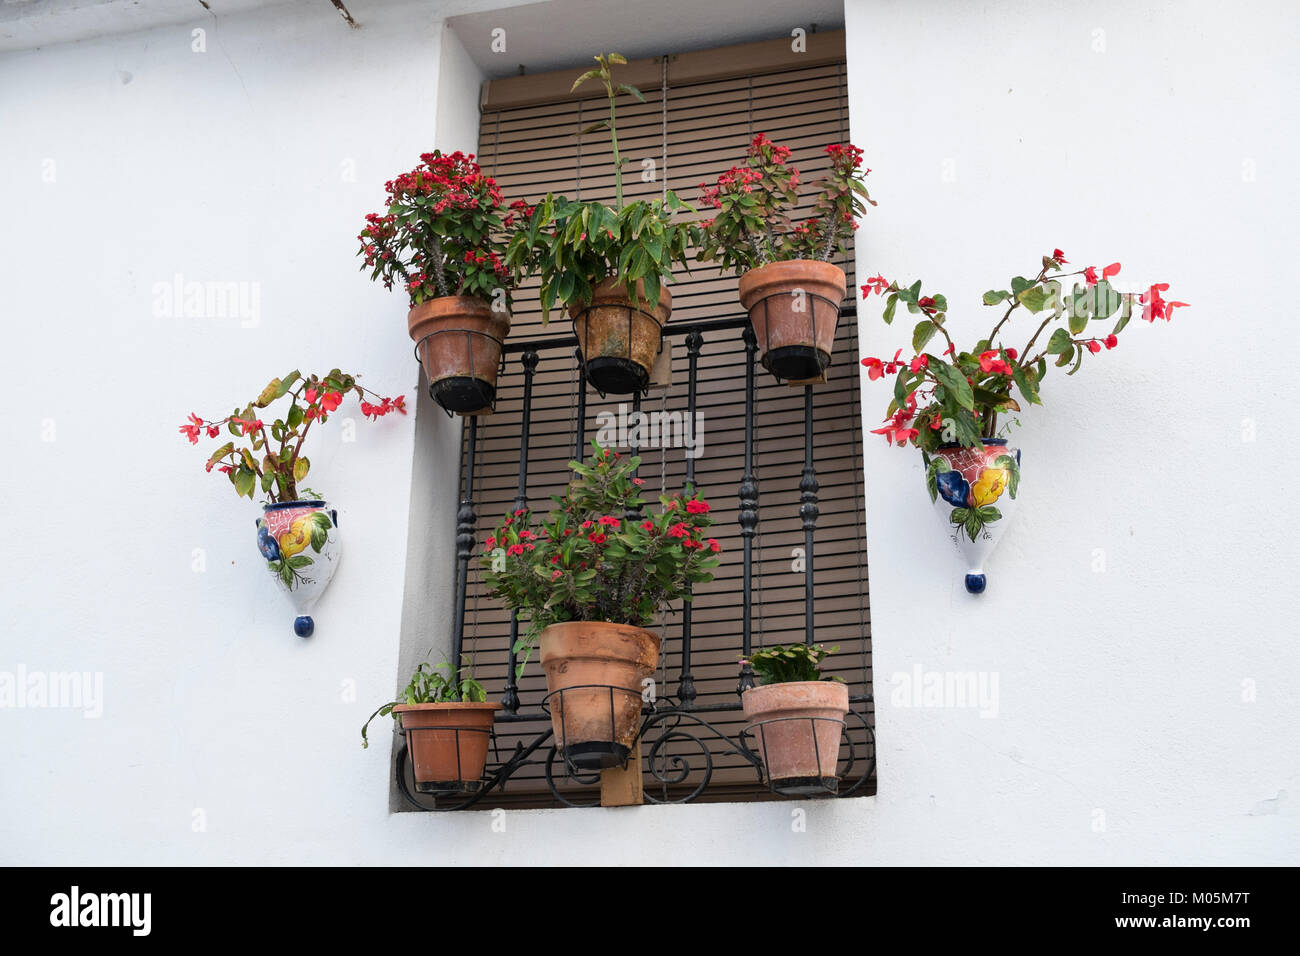 Wall decorated with flower pots (Begonia Dragon Wing and Euphorbia Milii). Istan, Malaga province, Andalusia, Spain. Stock Photo